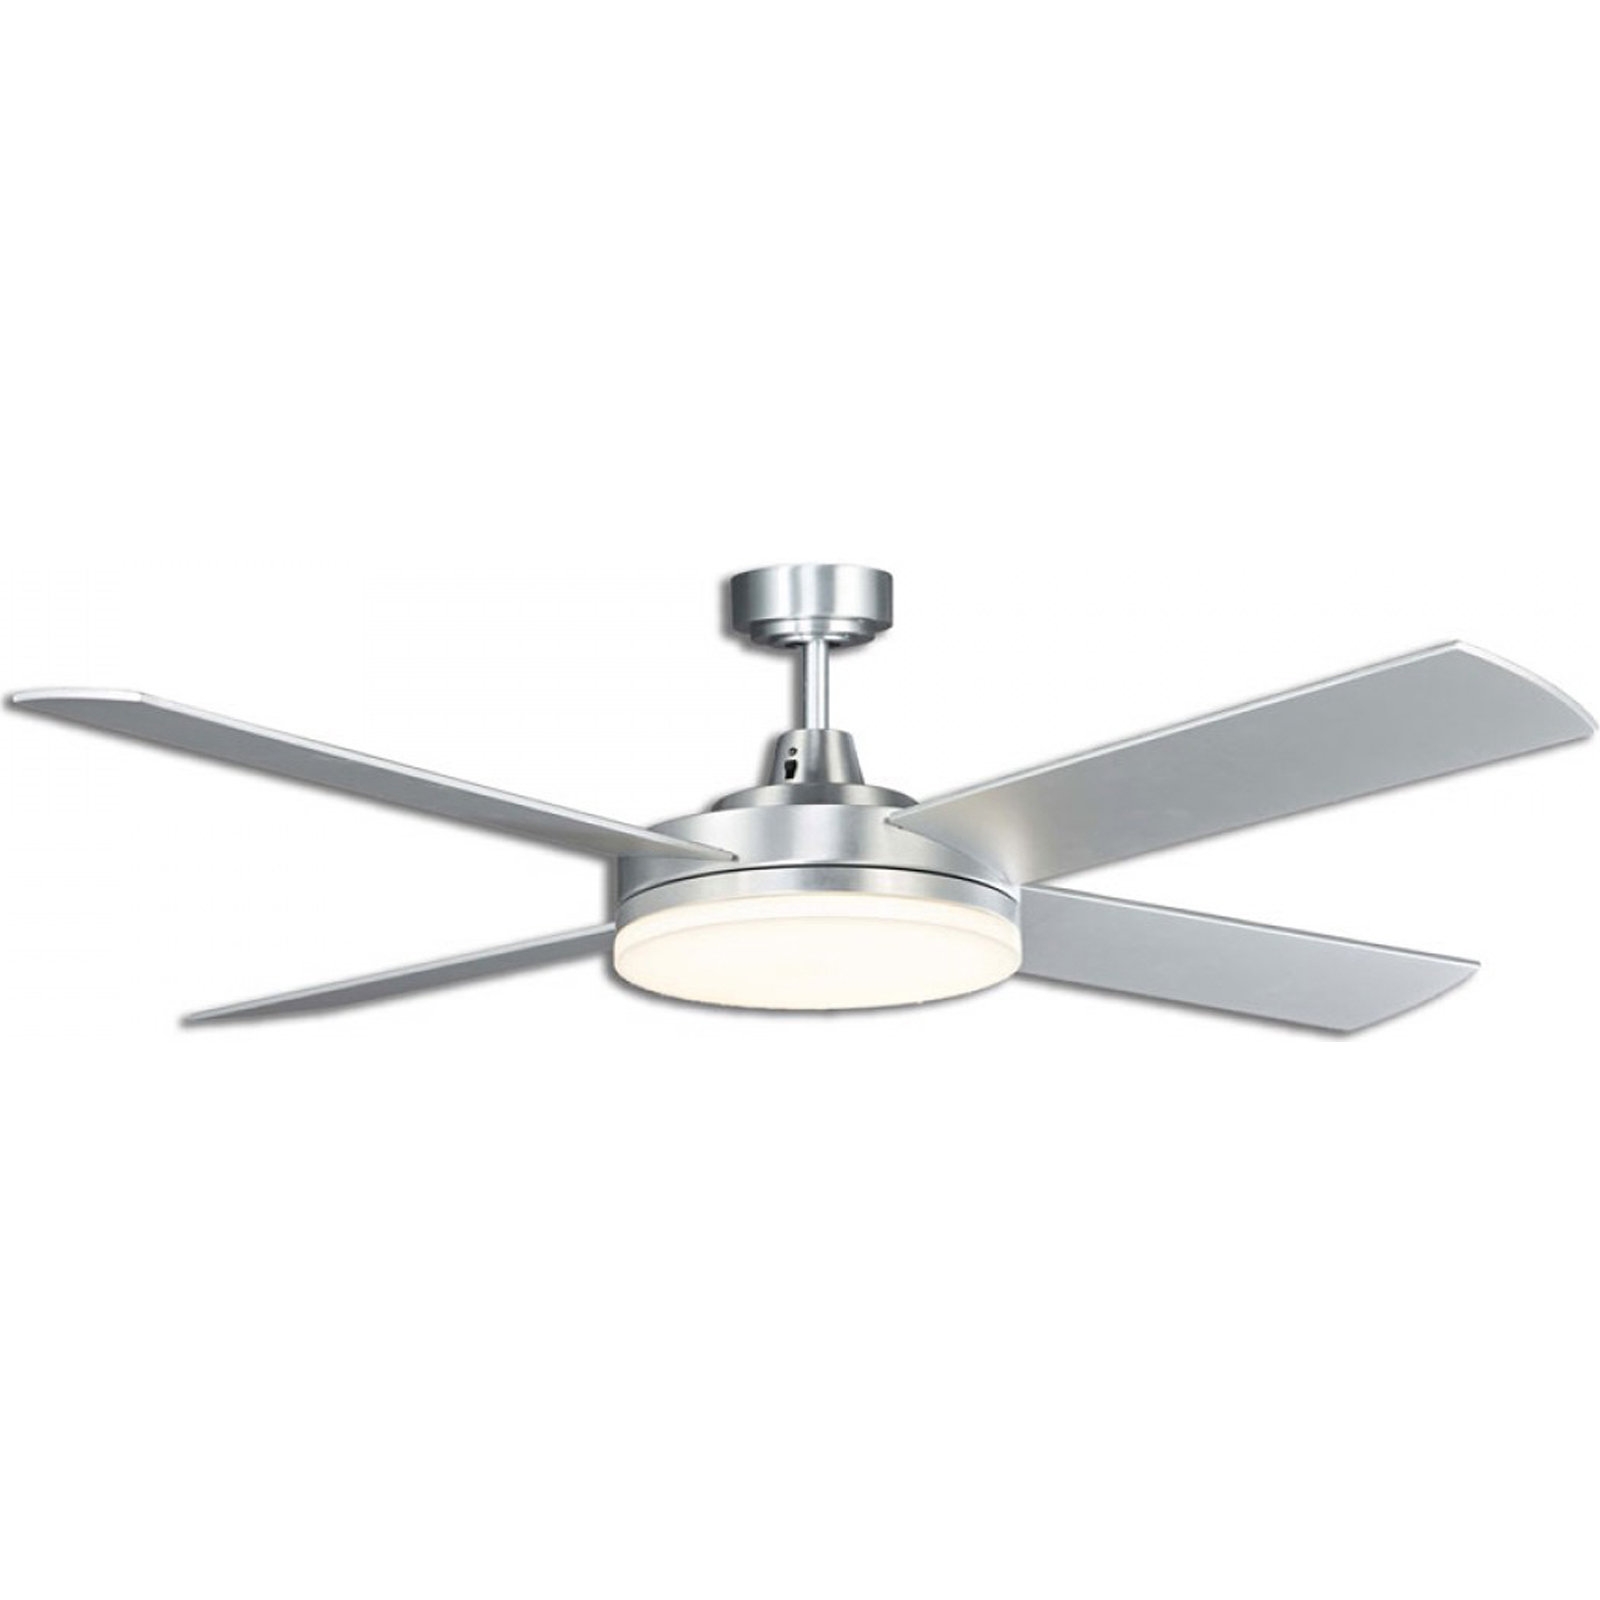 Low Profile Ceiling Fans With Led Lights